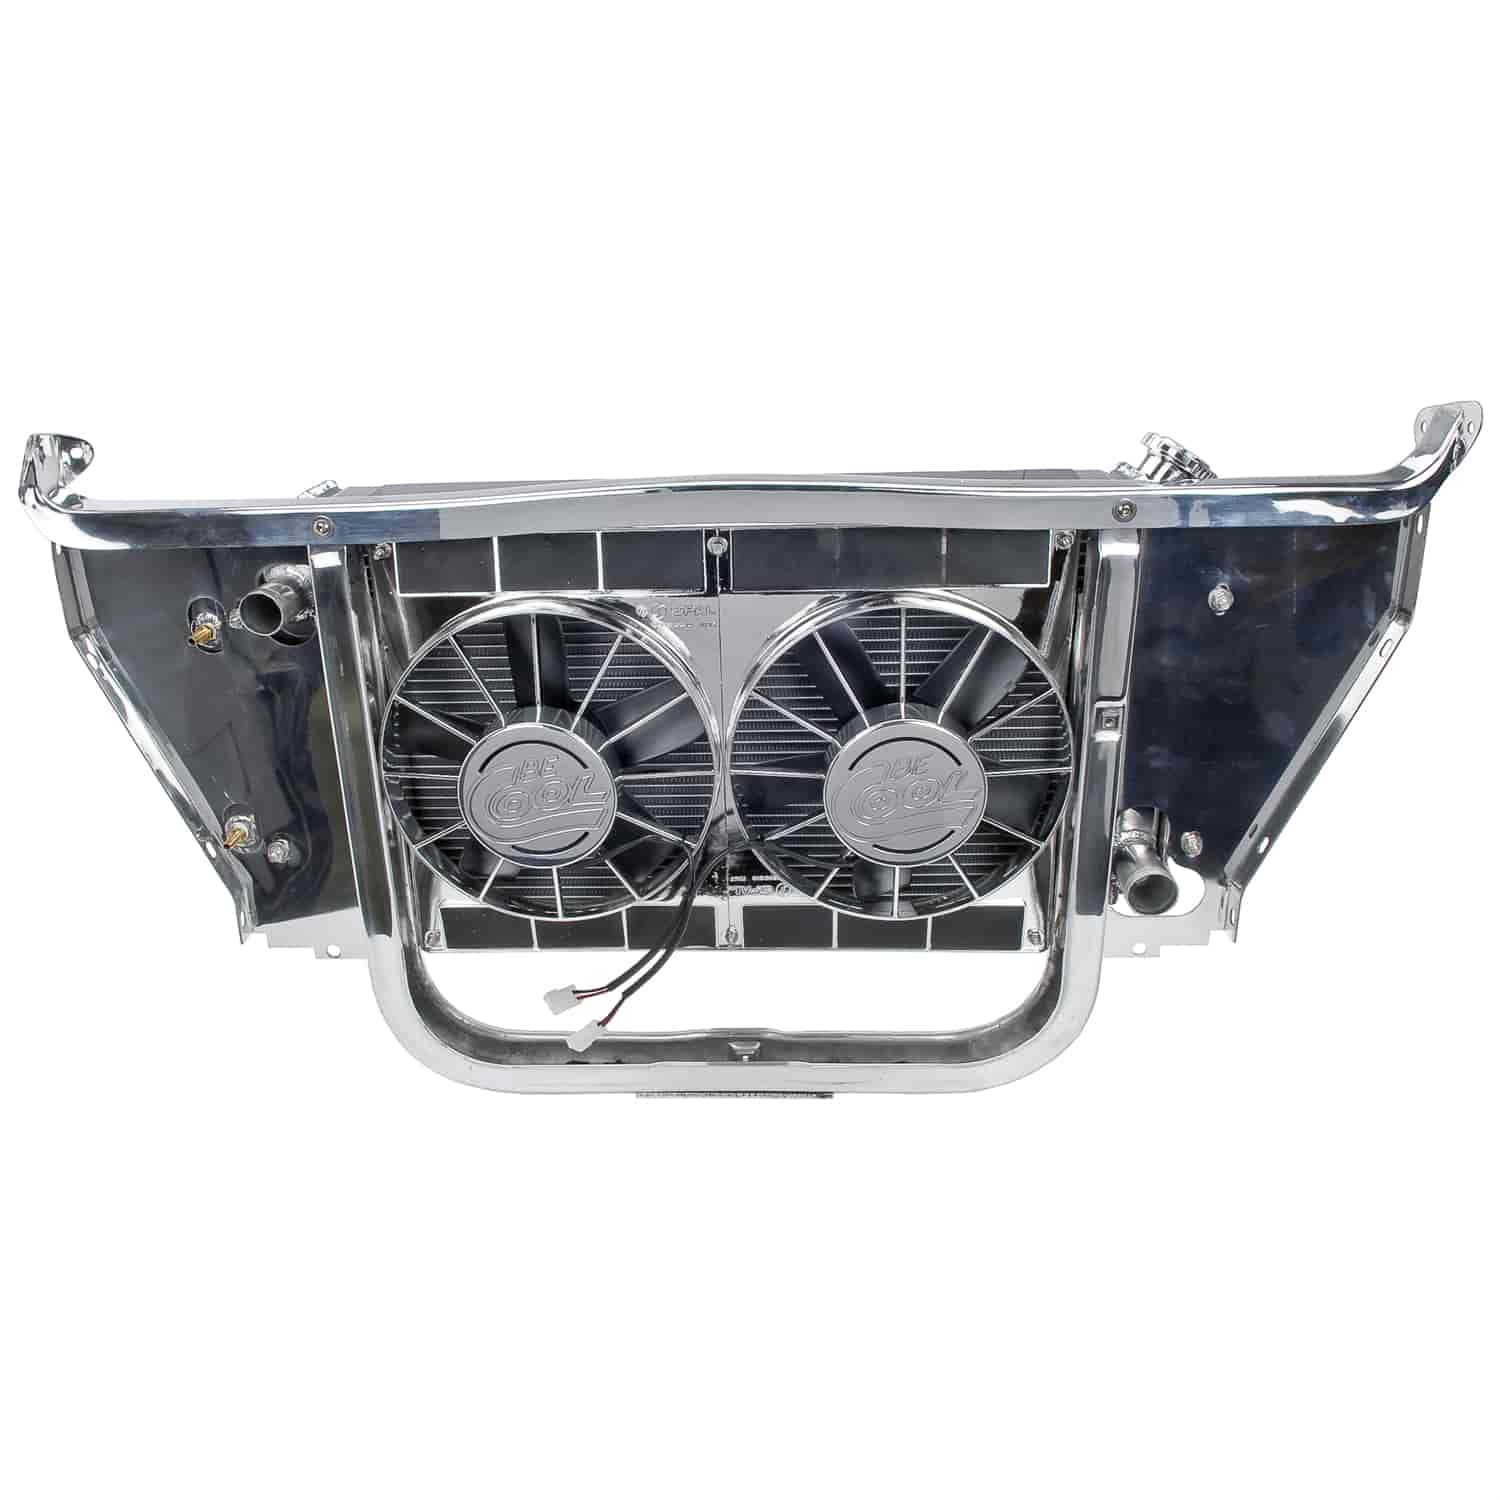 Extreme Tri-Five Module Cooling System 1957 SB/BB-Chevy 700